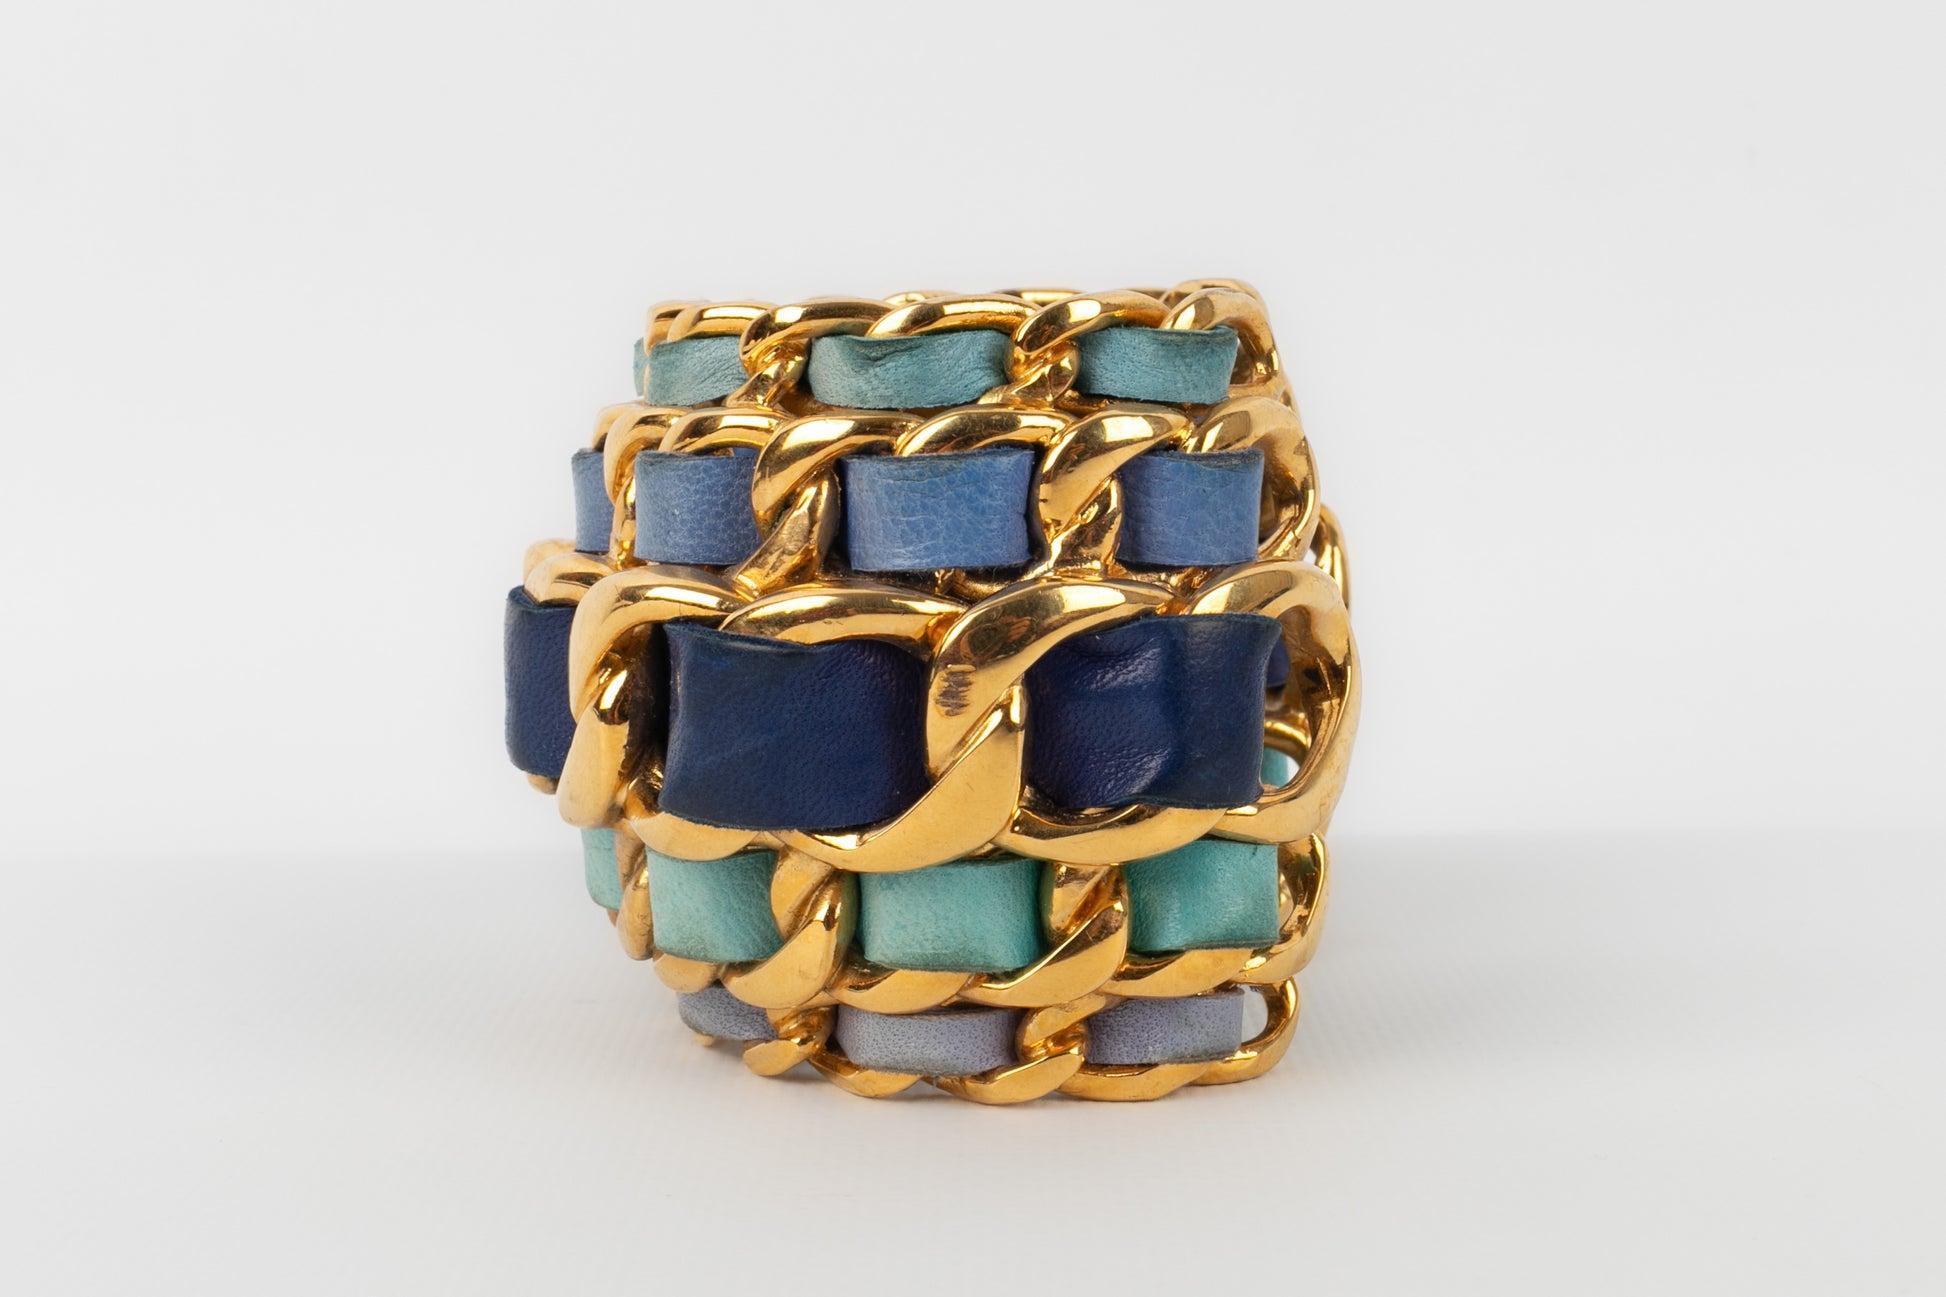 Chanel - (Made in France) Golden metal cuff bracelet interlaced with blue tone leather. 2cc6 Collection - 1991 Fall-Winter.

Additional information:
Condition: Good condition
Dimensions: Wrist circumference: 16 cm - Opening: 3 cm - Height: 6